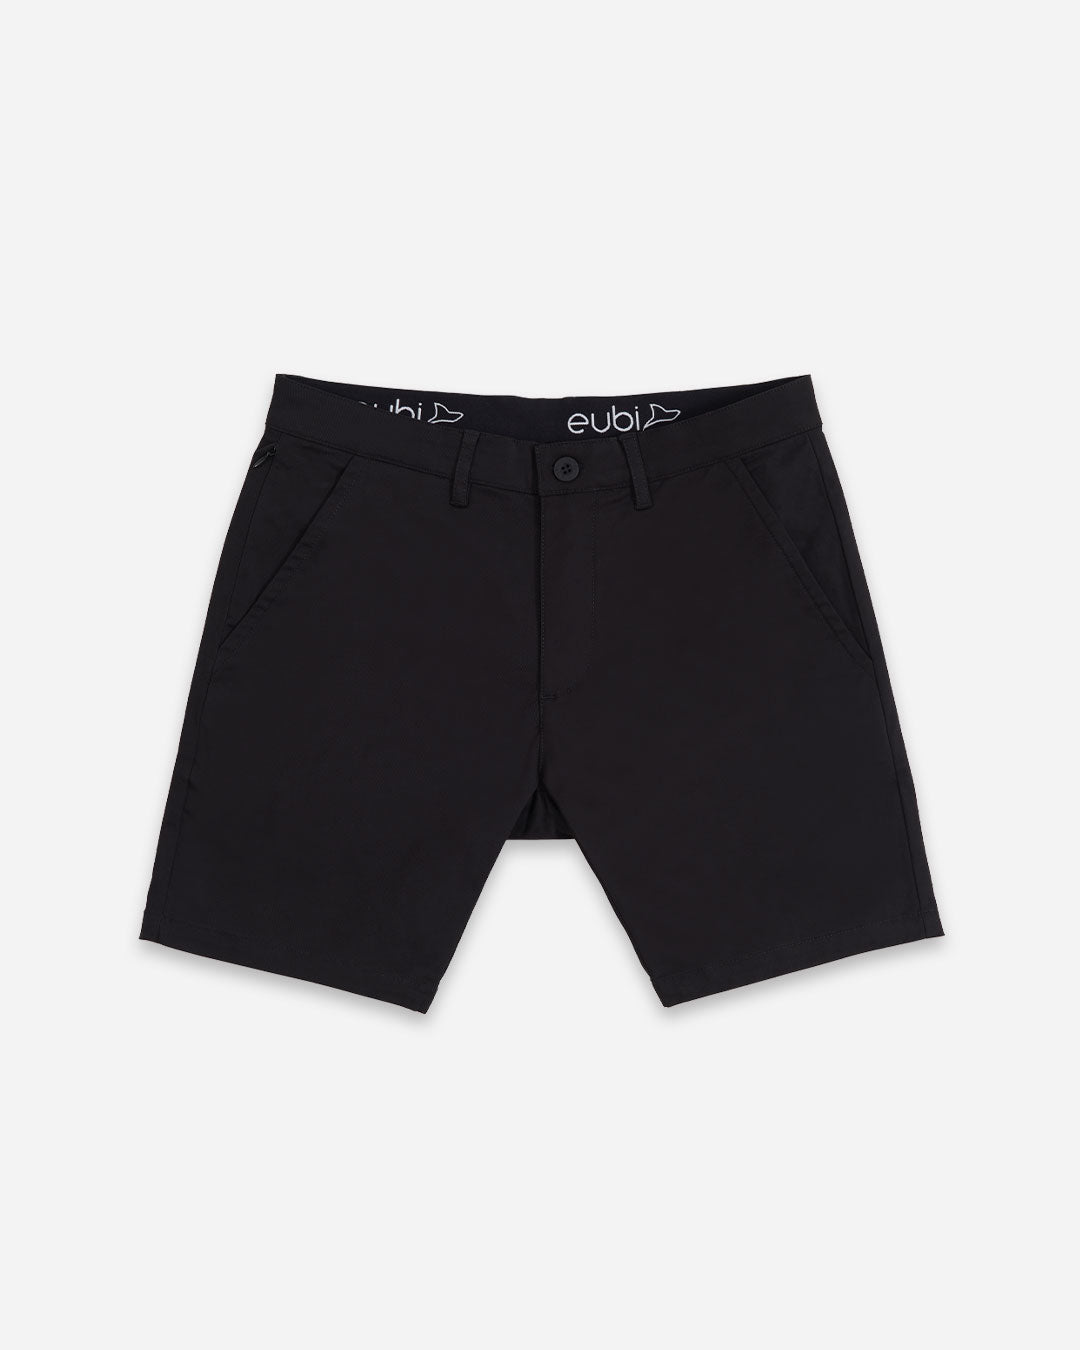 [Clearance] 7" All Day Chino Shorts 3.0